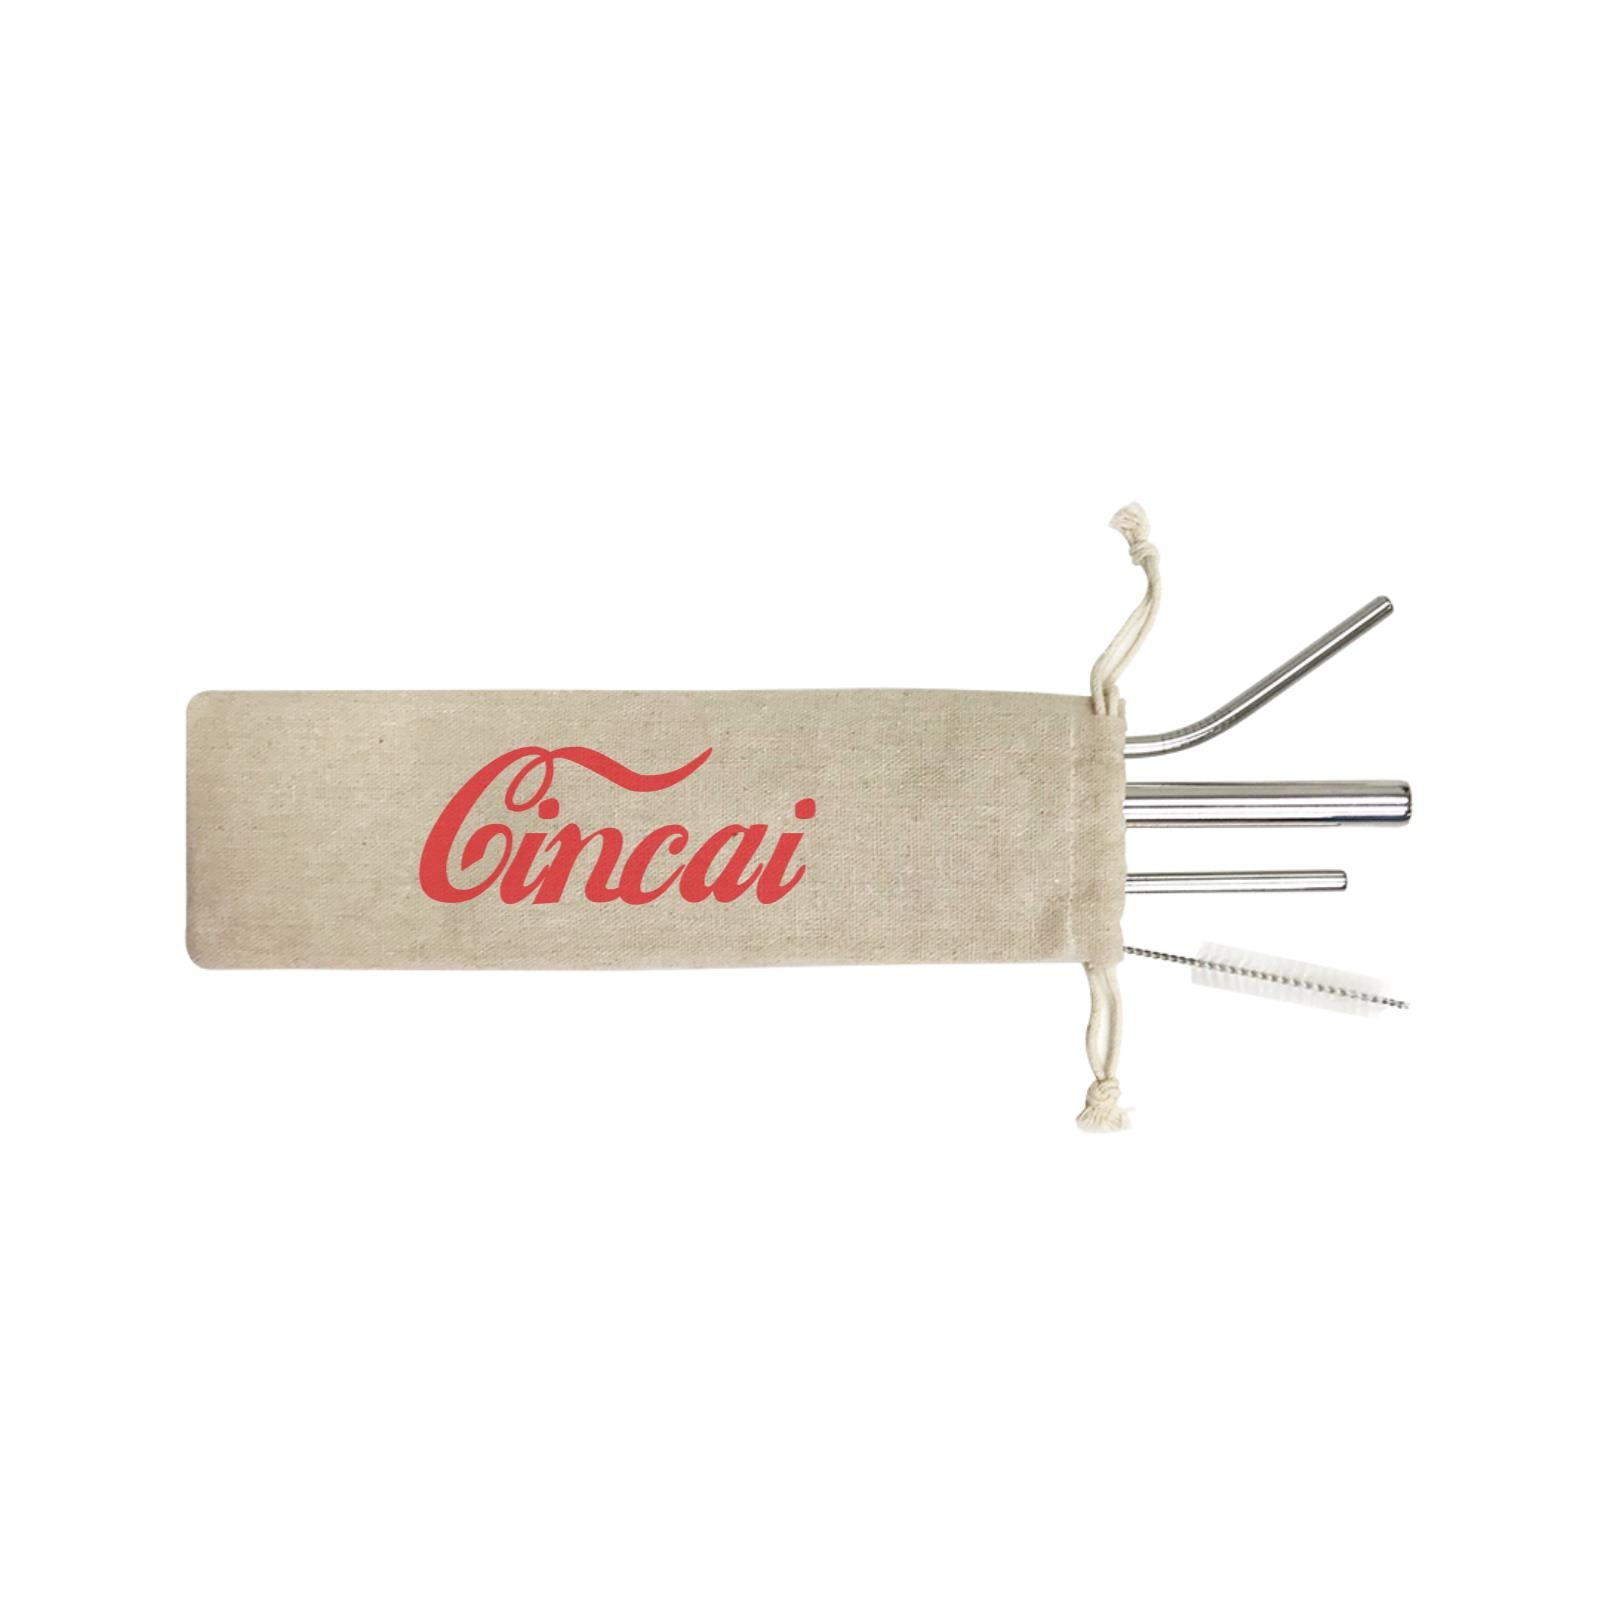 Slang Statement Cincai Cola 4-in-1 Stainless Steel Straw Set In a Satchel